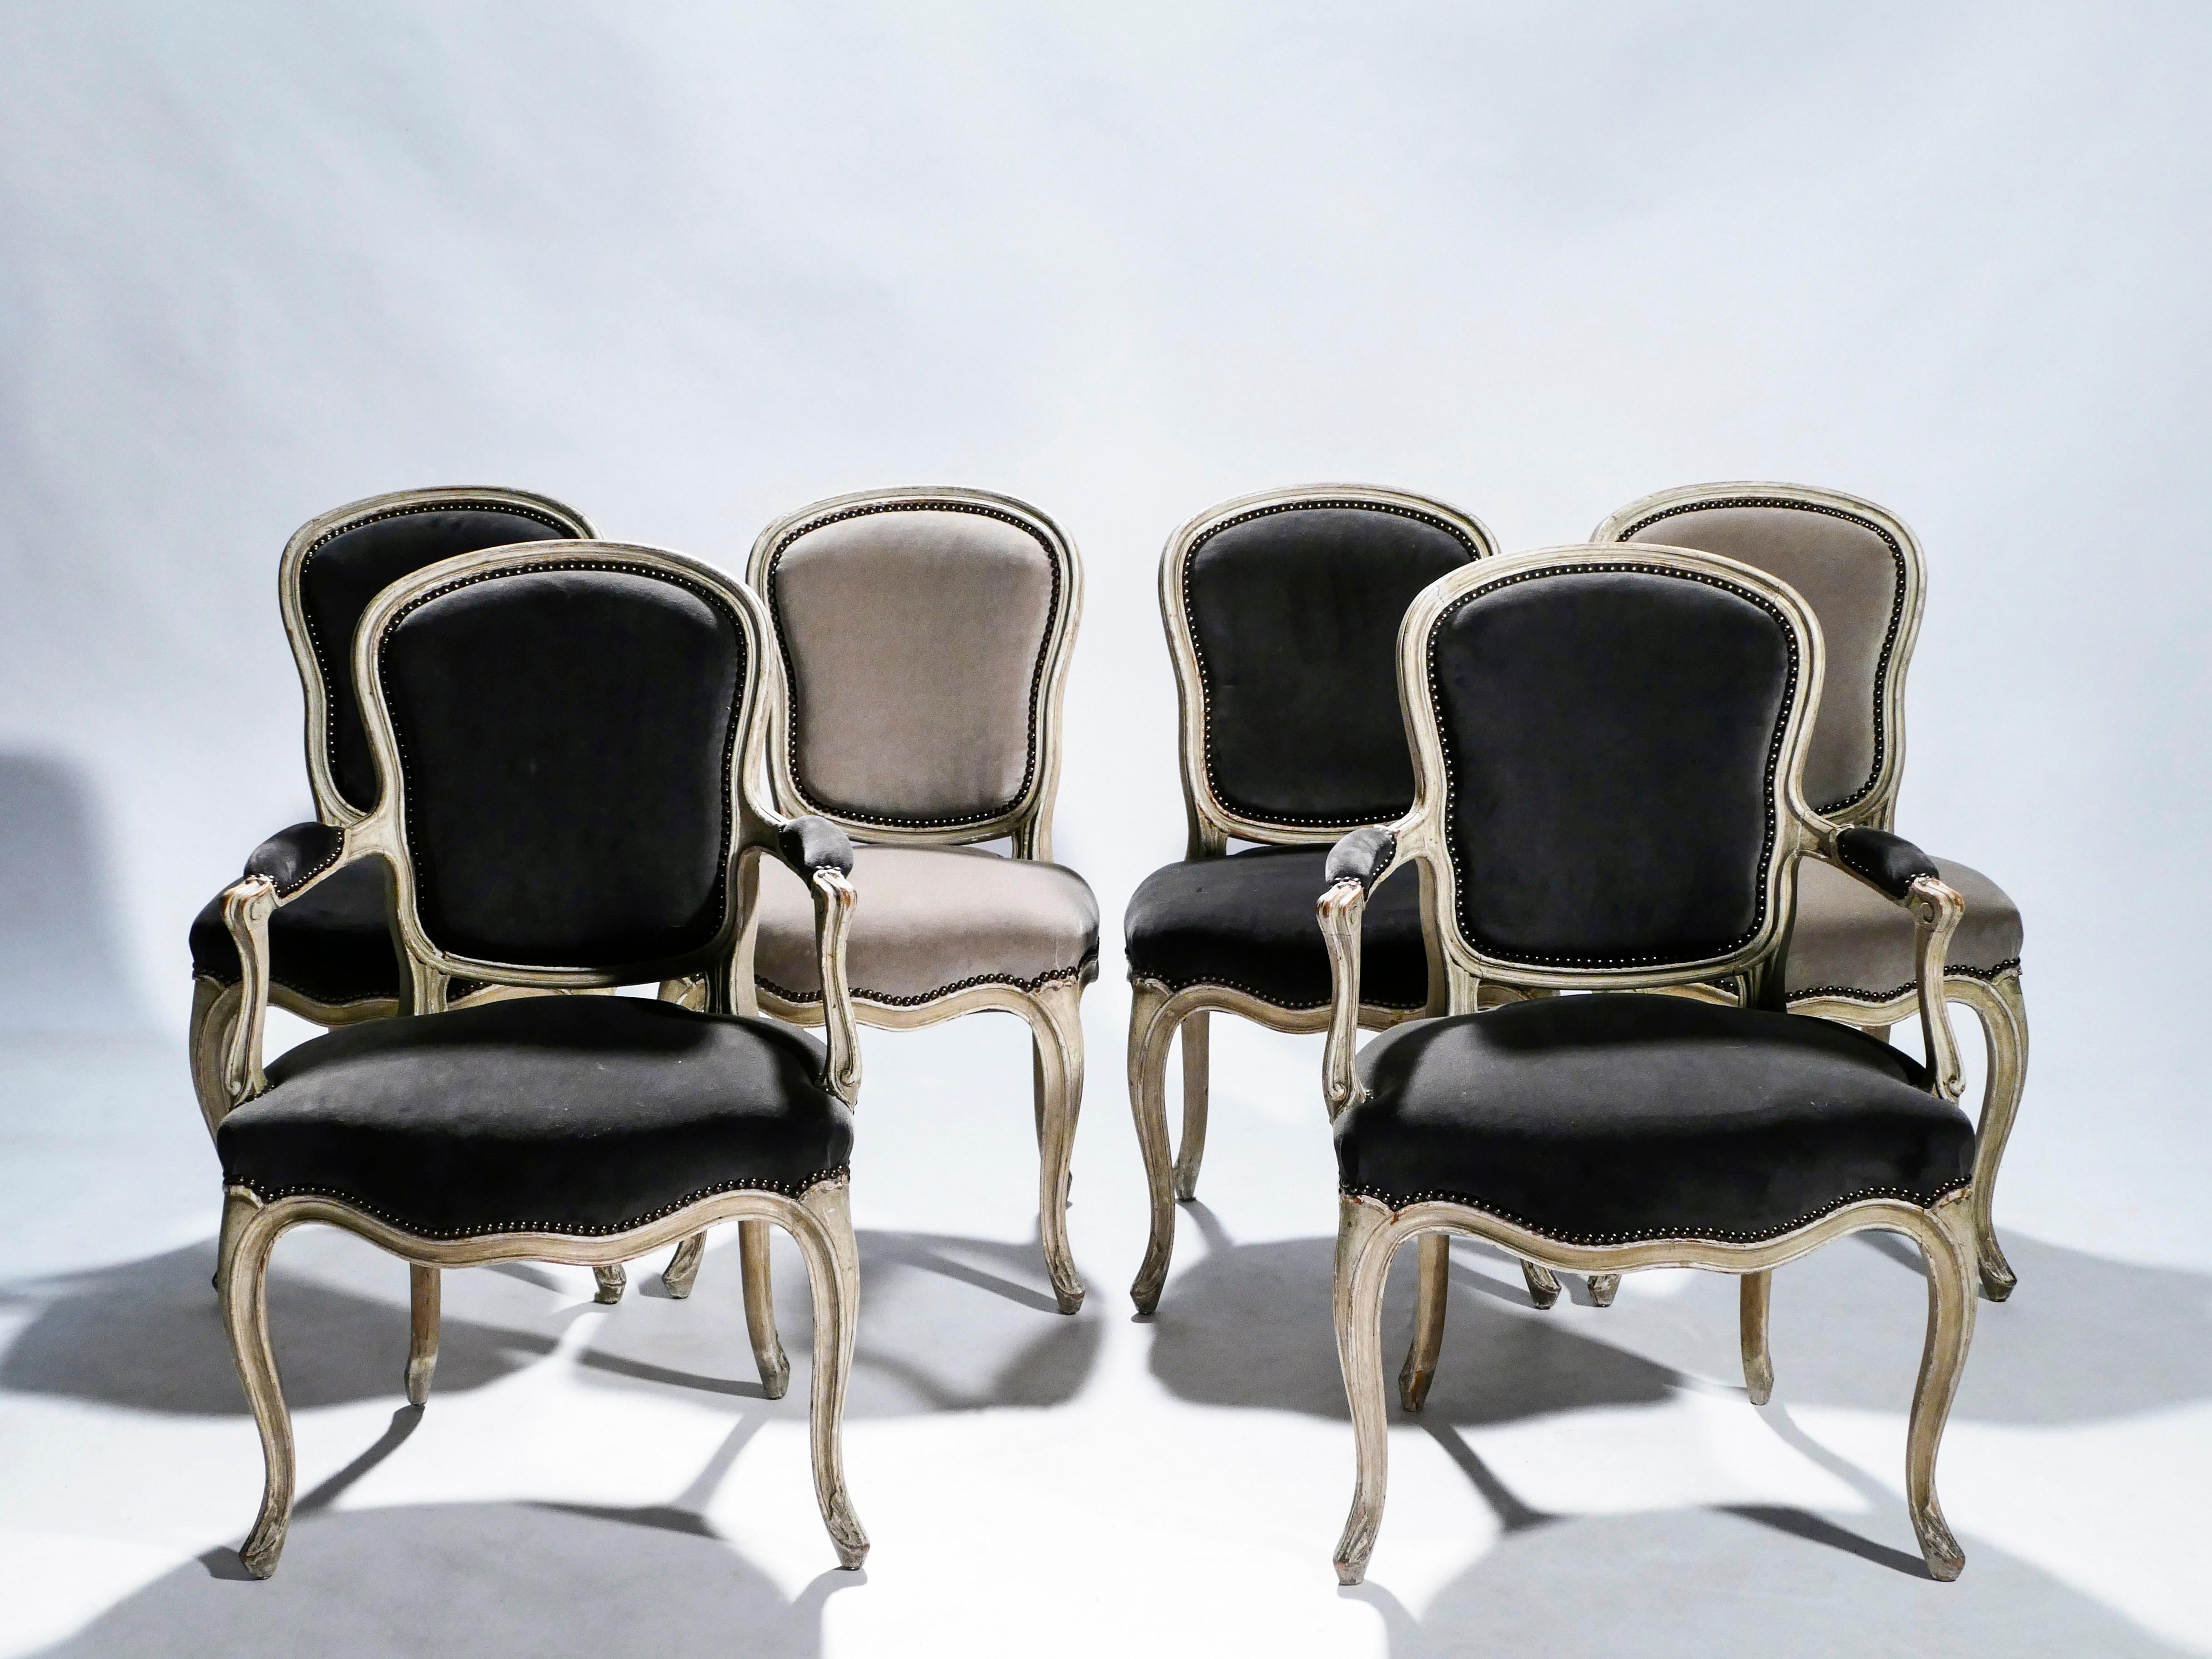 The construction of this set of 4 chairs and 2 armchairs was deeply cared about, and it shows in the finished product, even some eight decades later. The chairs were made and stamped by French firm Maison Jansen in the early 1940s in their pure